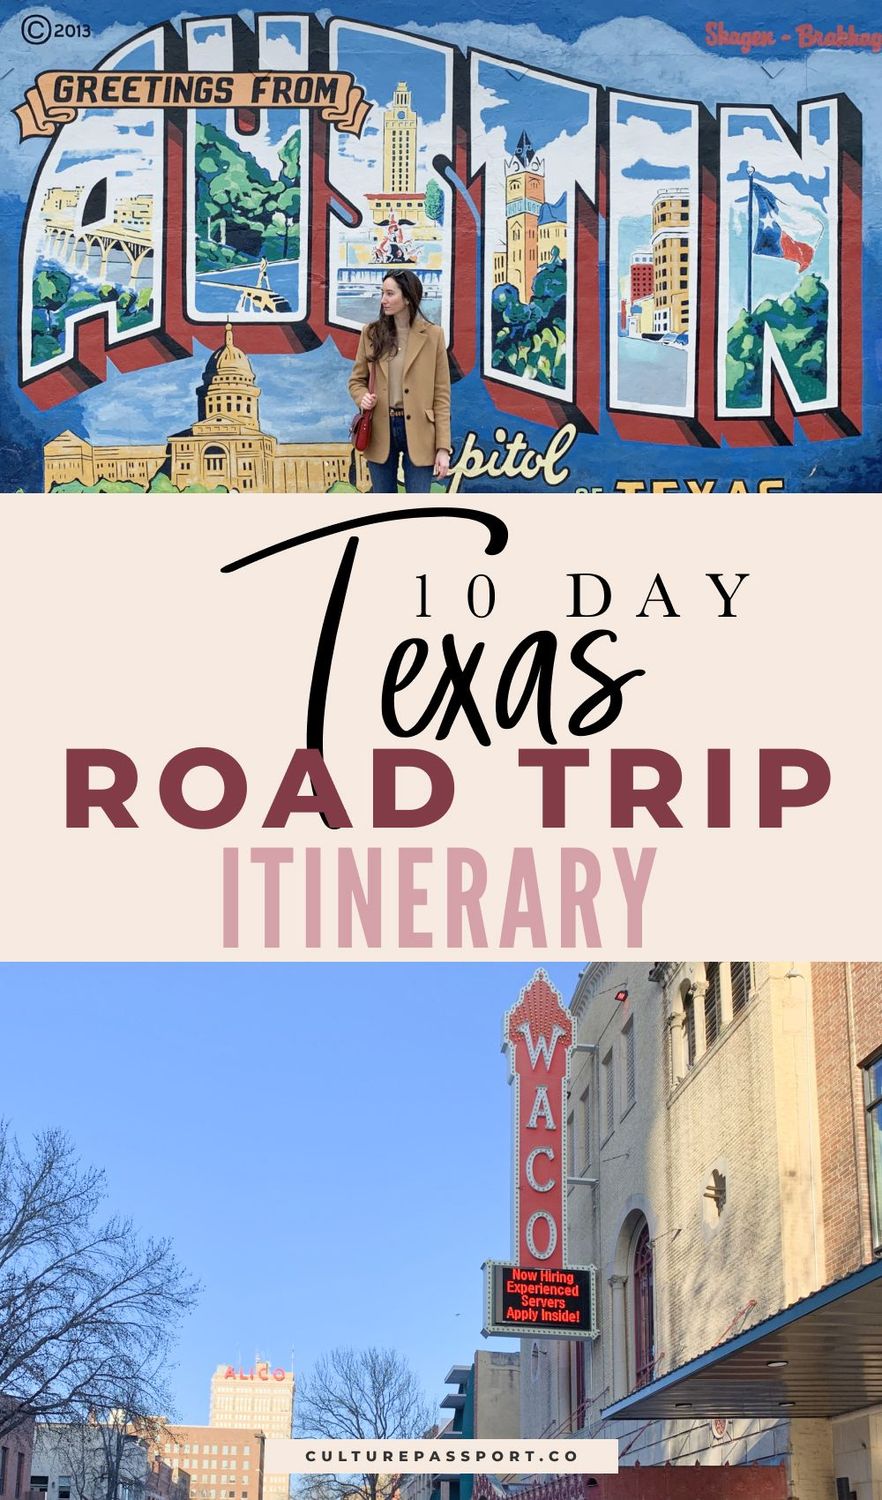 10-day Texas Road Trip Itinerary